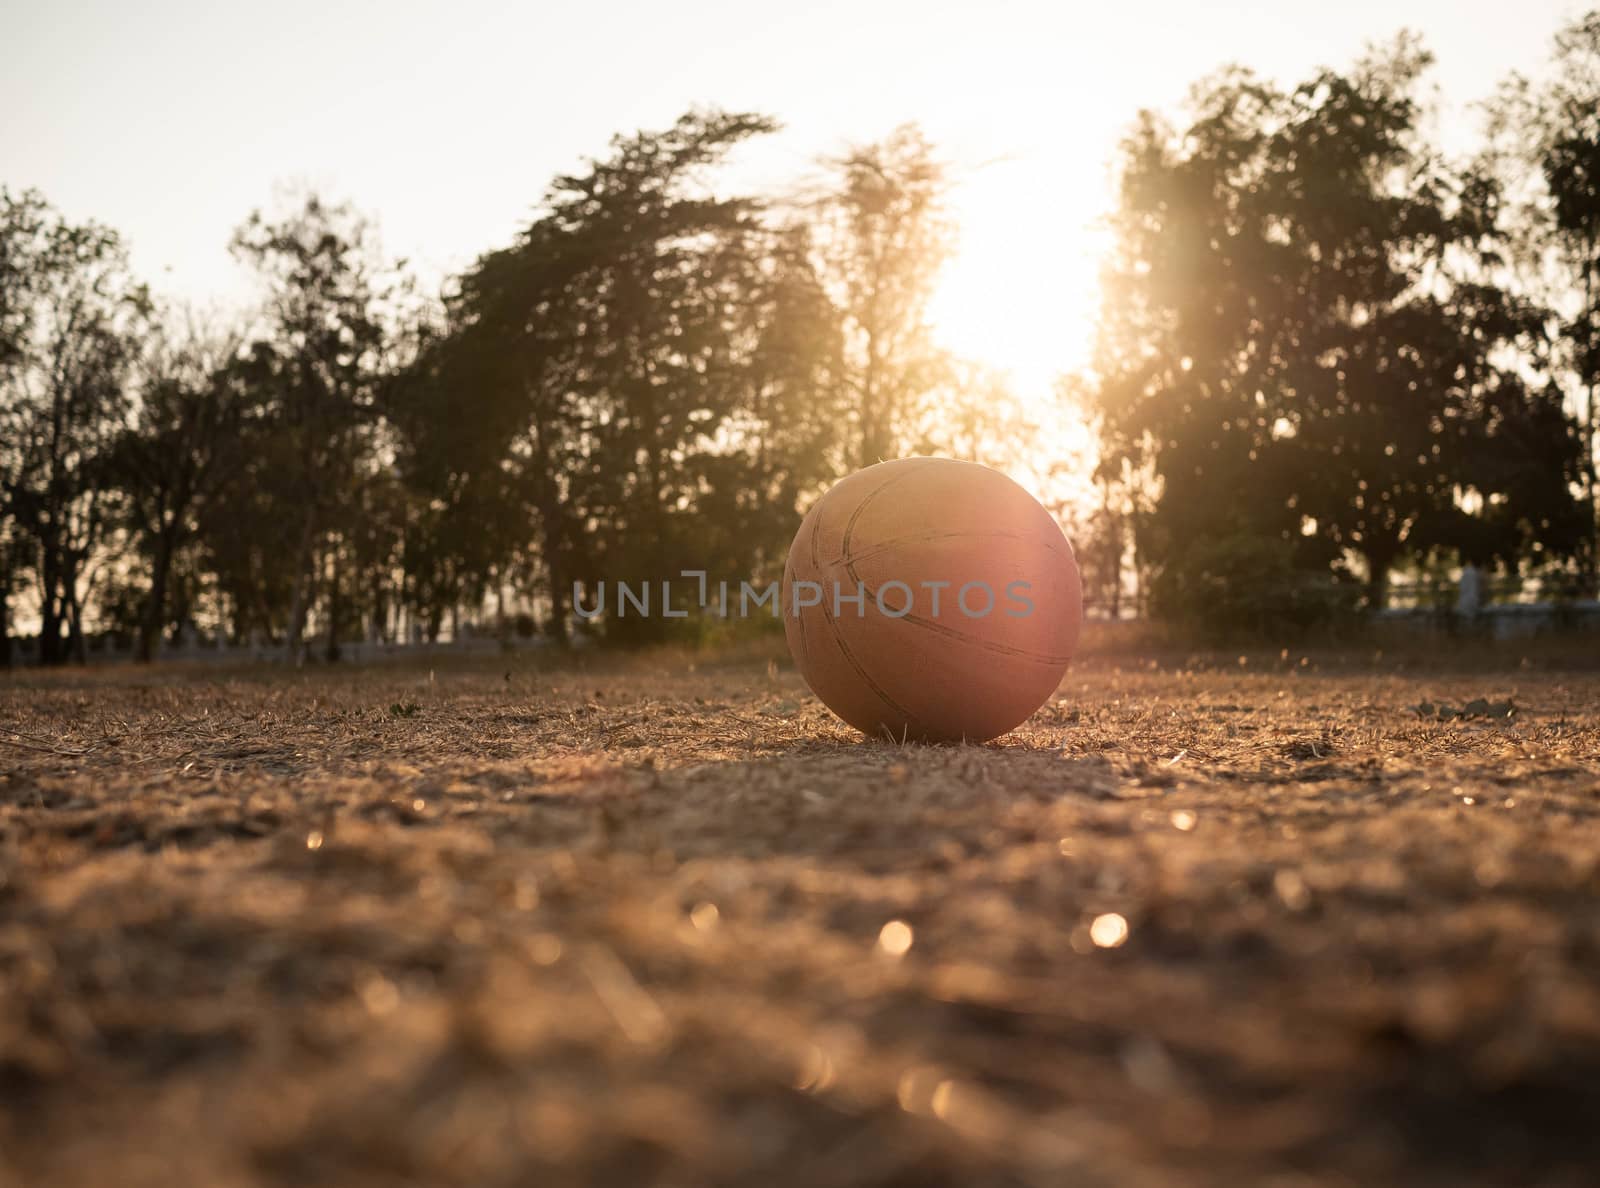 Basketball on grass ground with sunset light background in the public stadium.